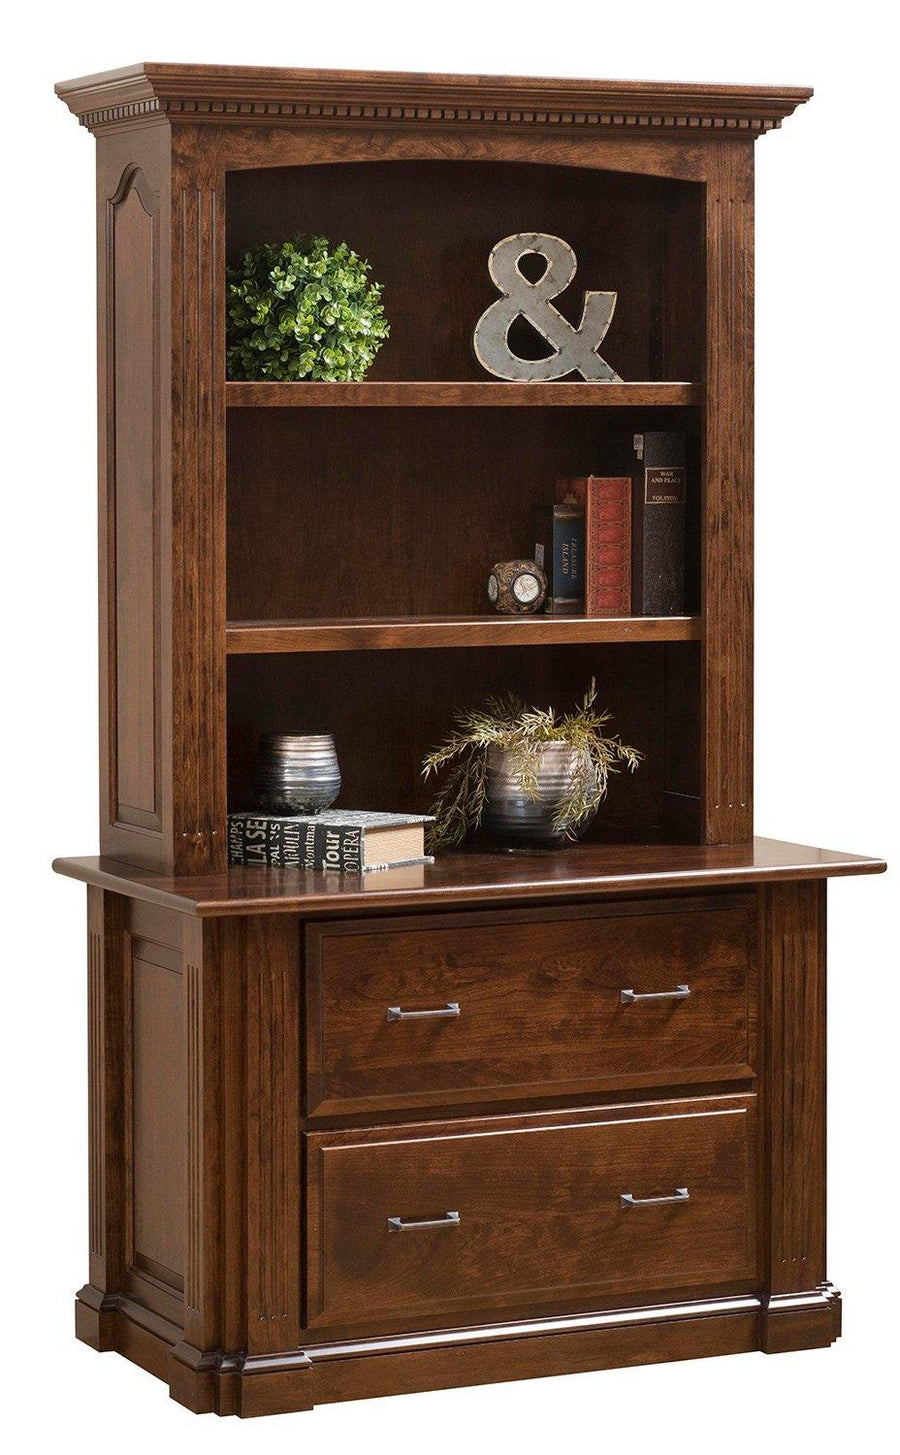 Signature Amish Lateral File & Hutch - Foothills Amish Furniture